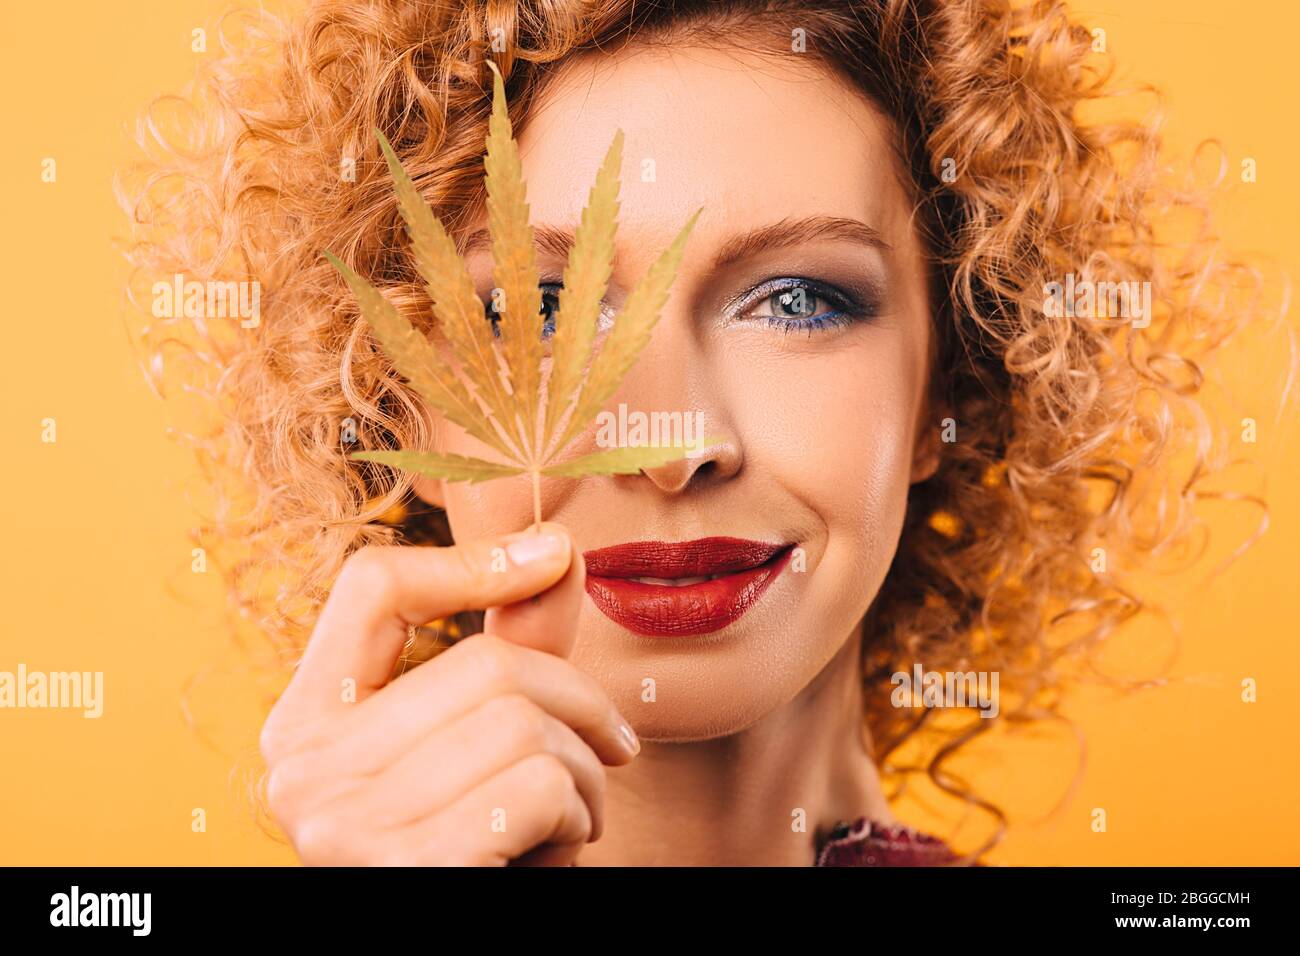 Portrait of a curly woman with a leaf of marijuana in her hand. Face close-up on a yellow background. Legalization of drugs Stock Photo